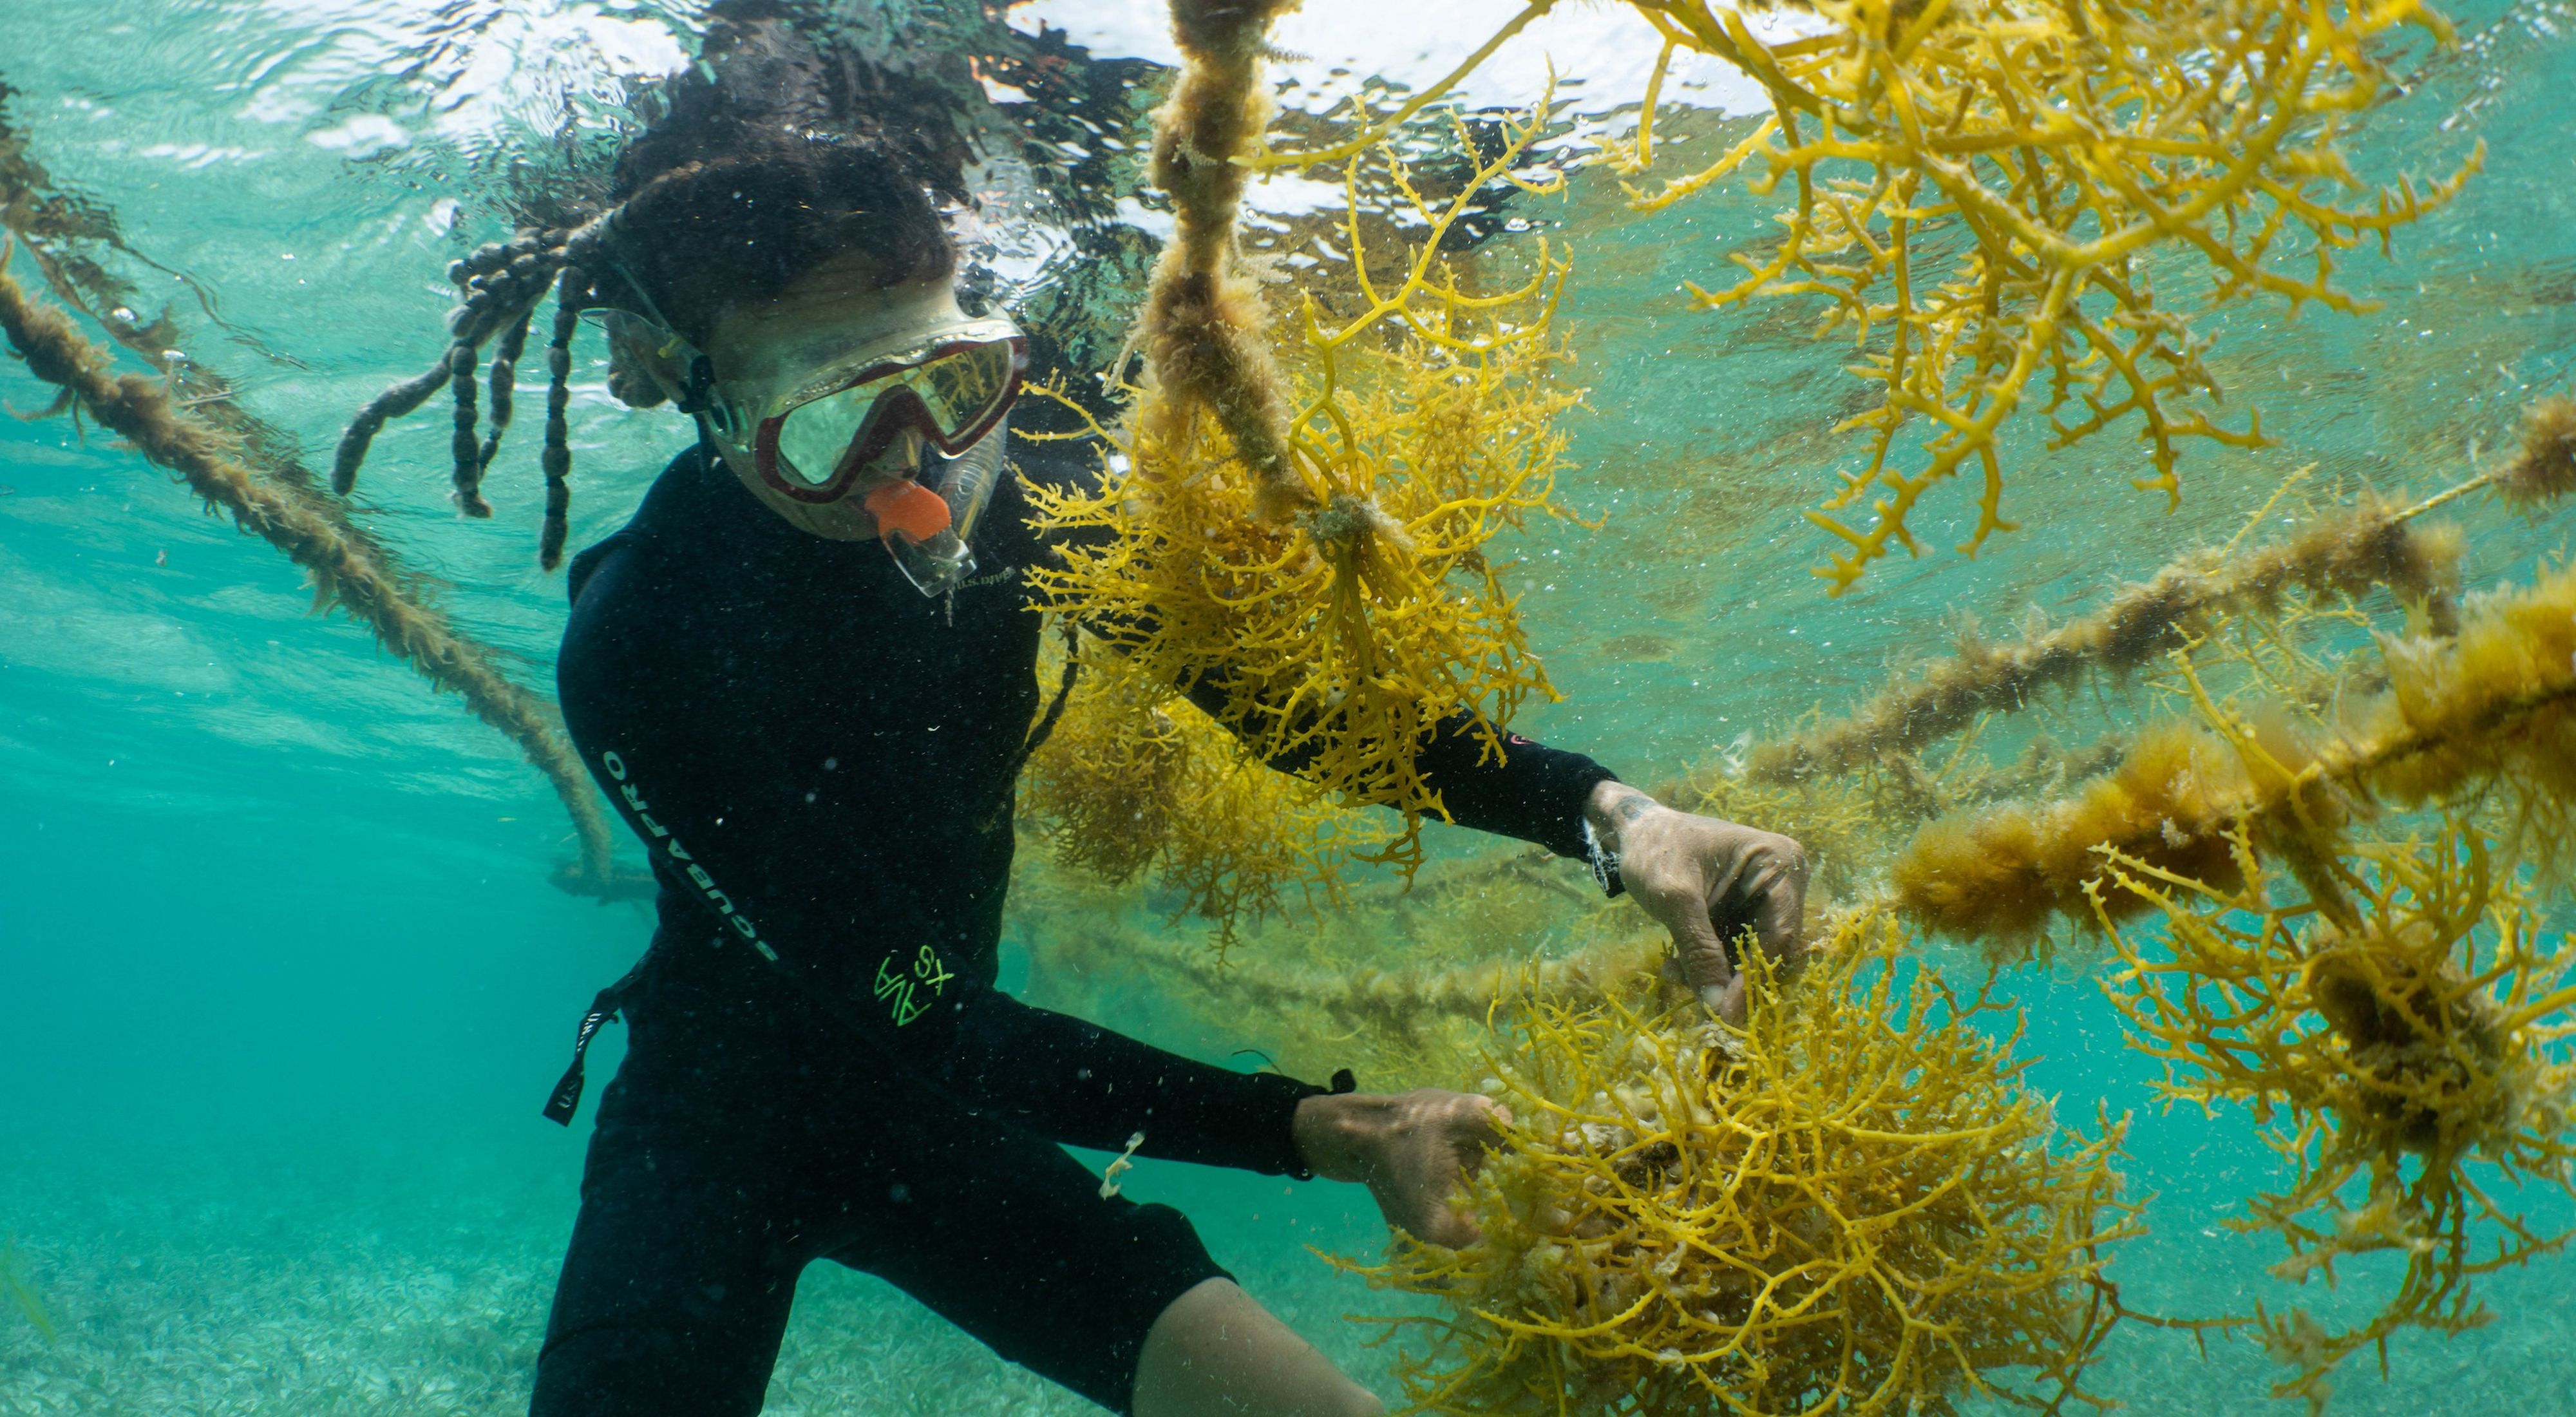 A diver cultivates seaweed underwater.